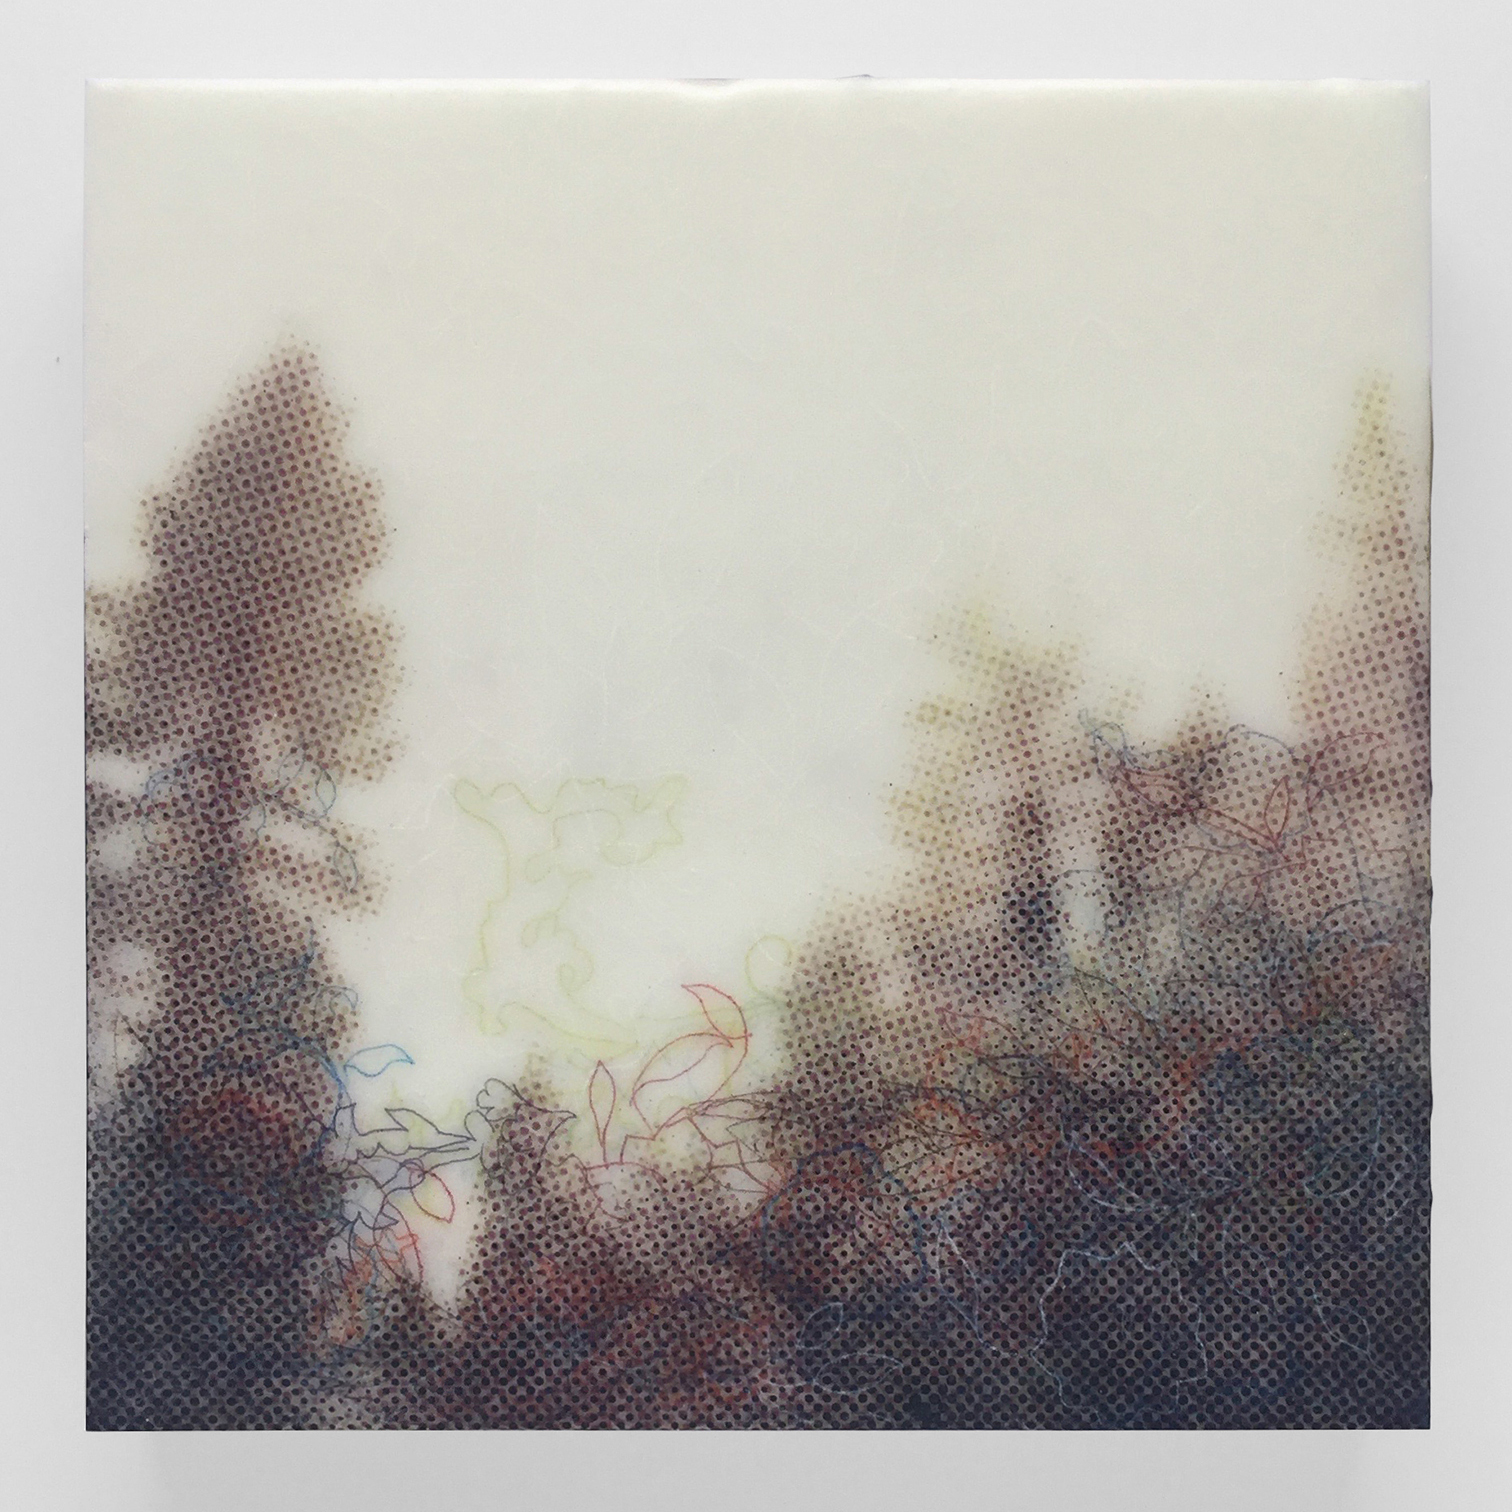 Karen Gallagher Iverson, Crest From Below, Tahoe Tree Line 6, Pochoir printed and drawn colored pastel on wax on panel, 10 in x 10 in, 2018